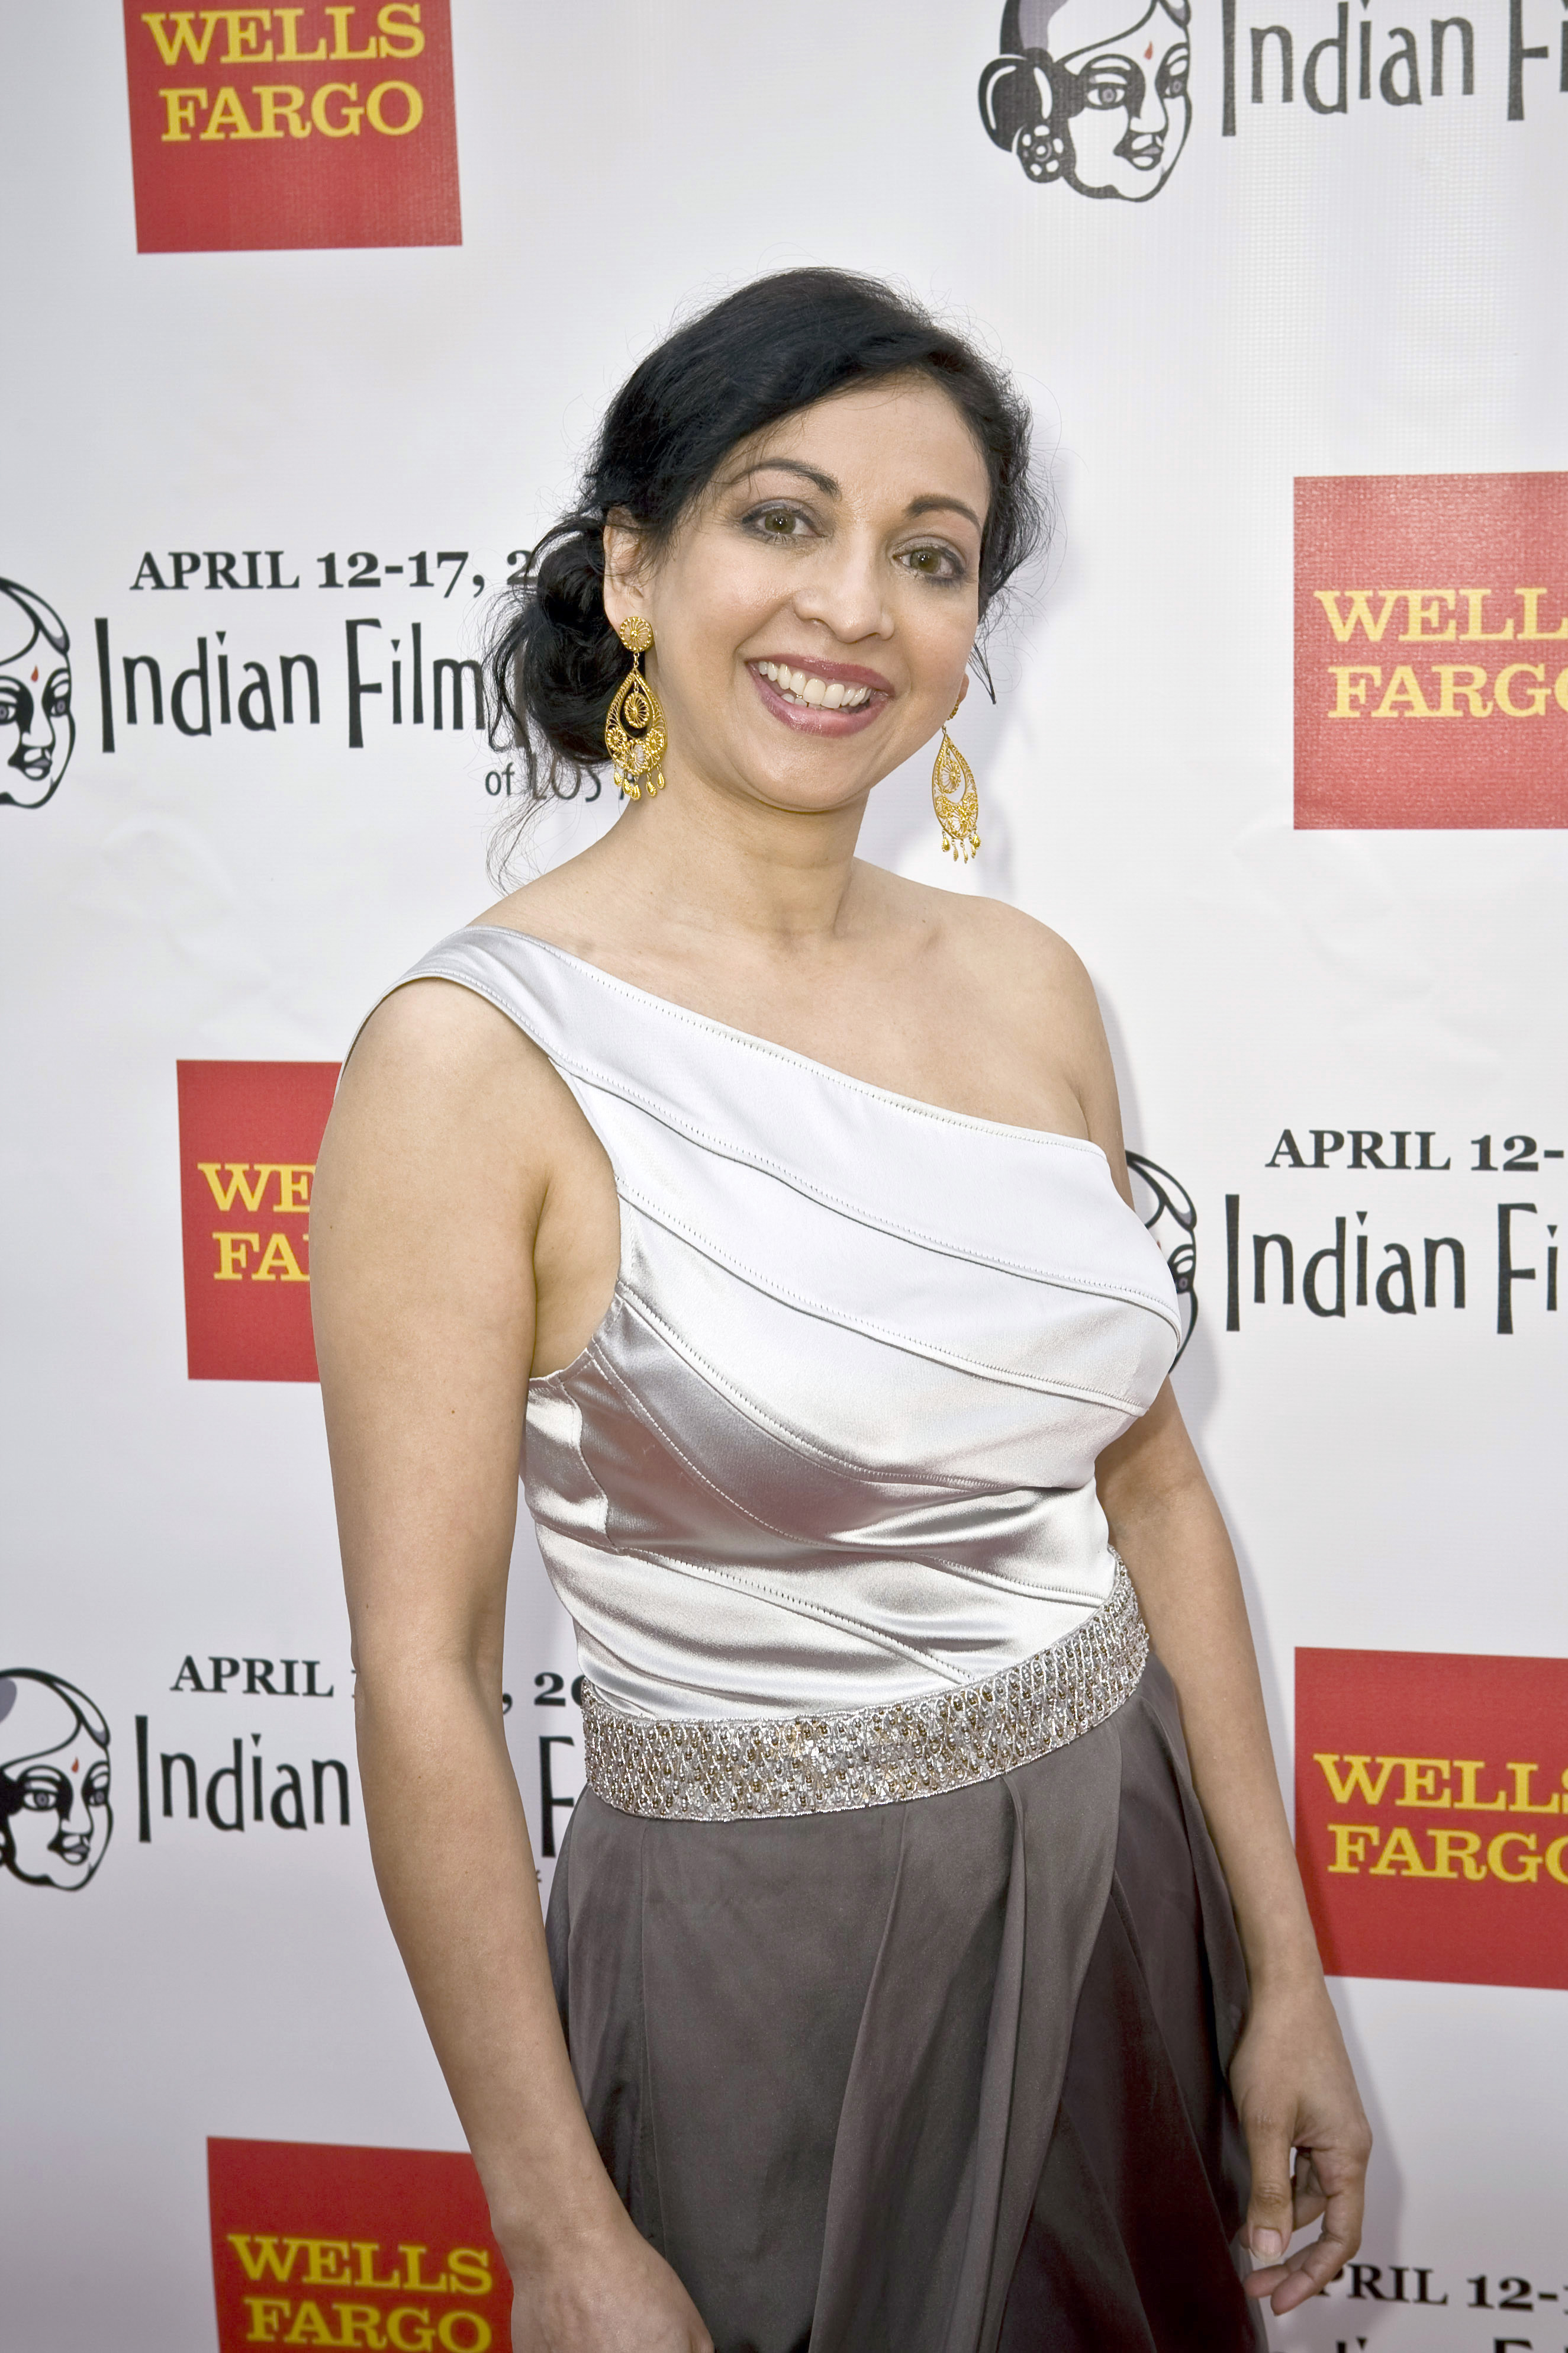 Indian Film Festival of Los Angeles 2011